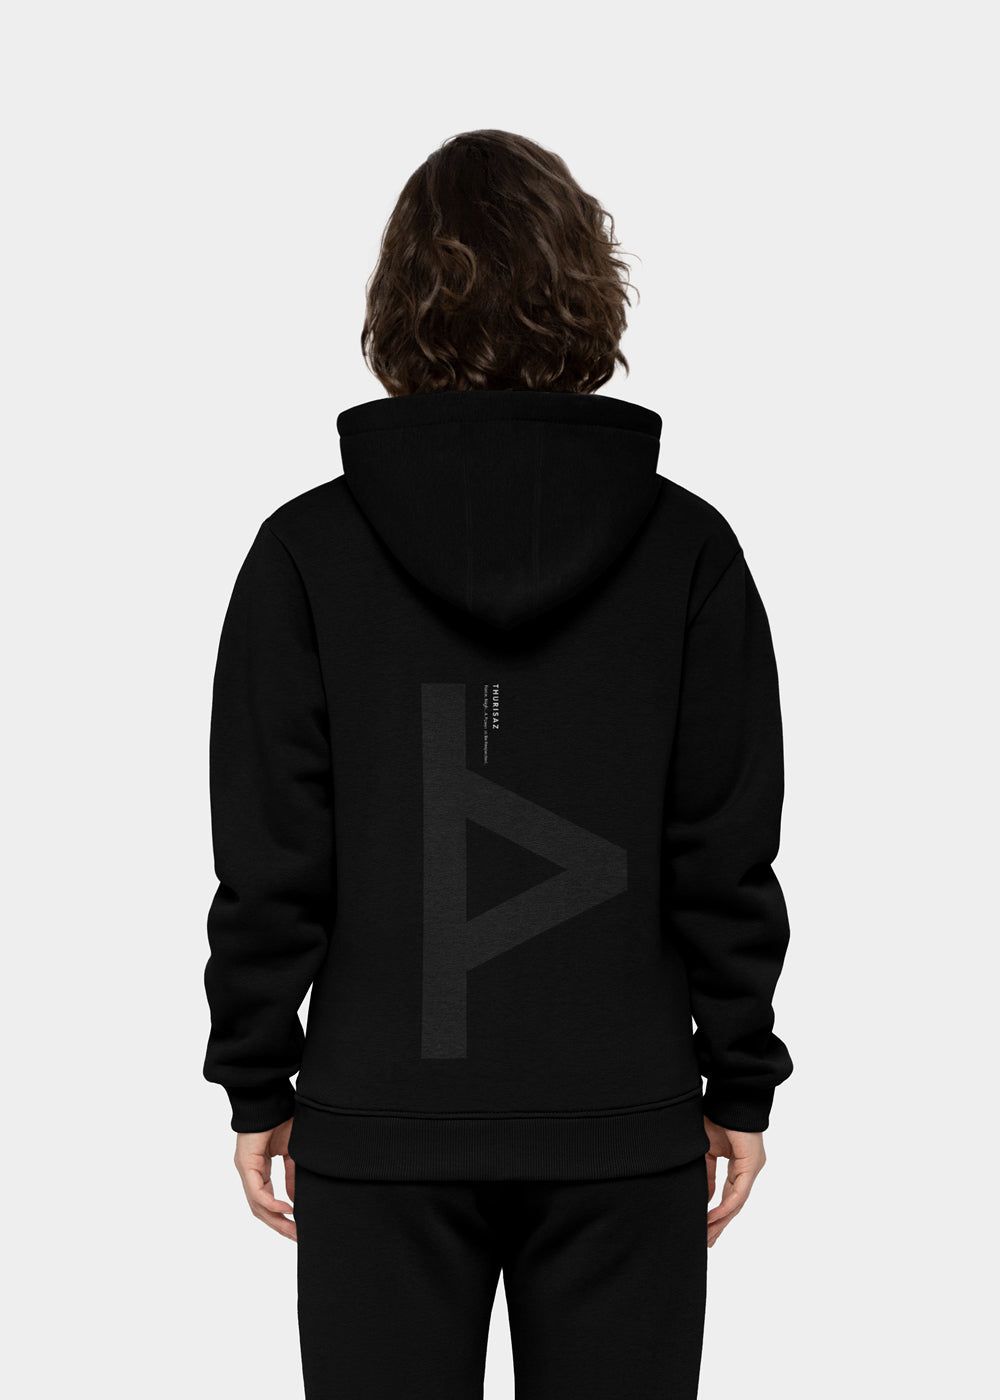 Thurisaz Rune Black Hoodie combines both Norse Mythology and Scandinavian aesthetic. If Norse Mythology and minimalism is your style, shop now.